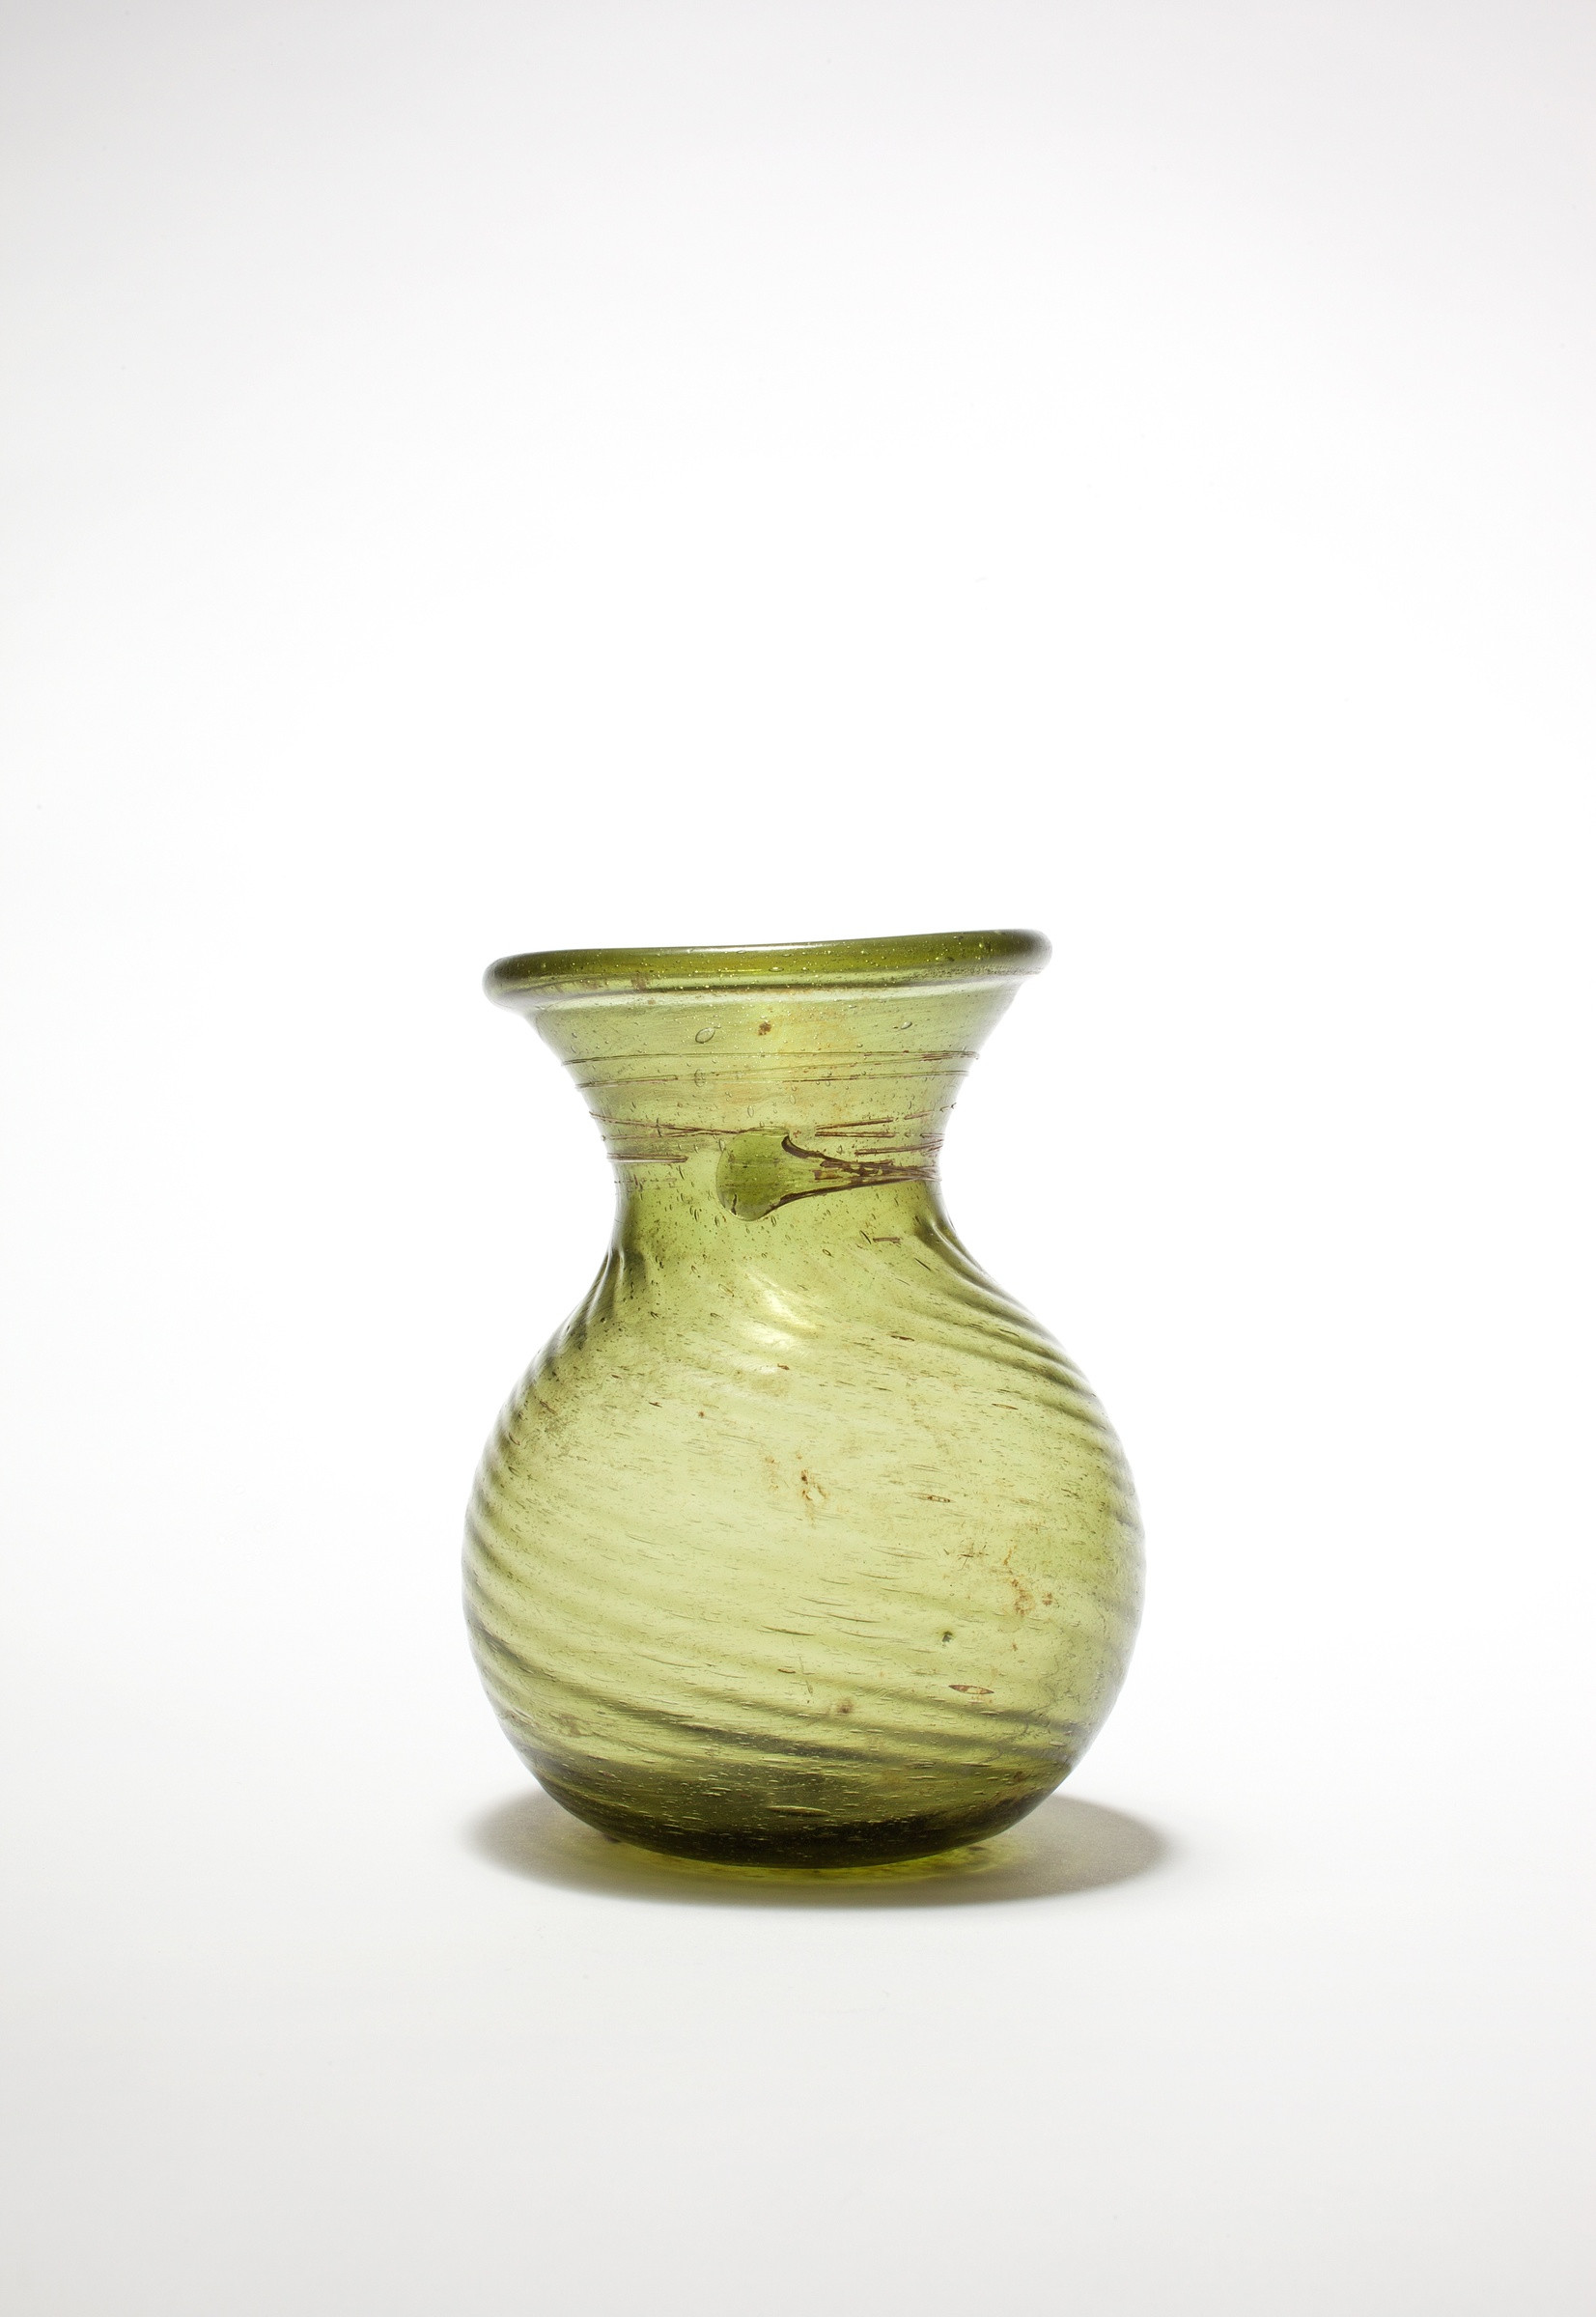 21 Fabulous Yellow Pottery Vase 2024 free download yellow pottery vase of anglo saxon glass globular beaker 6th 7th century ad charles ede with regard to anglo saxon glass globular beaker